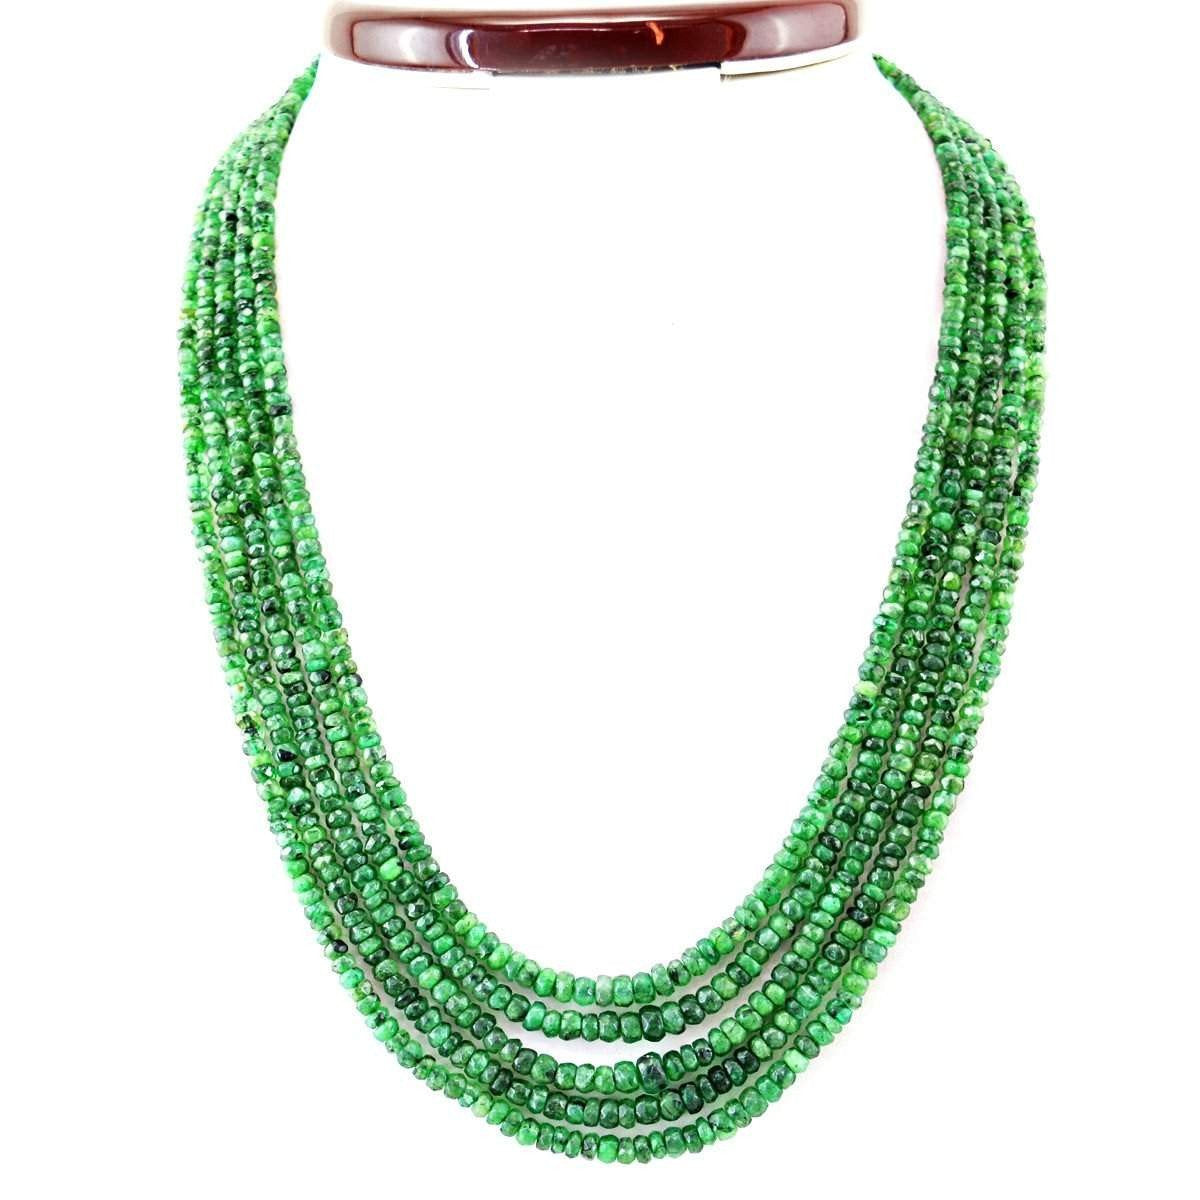 gemsmore:Natural Untreated Green Emerald Necklace 5 Line Round Cut Beads